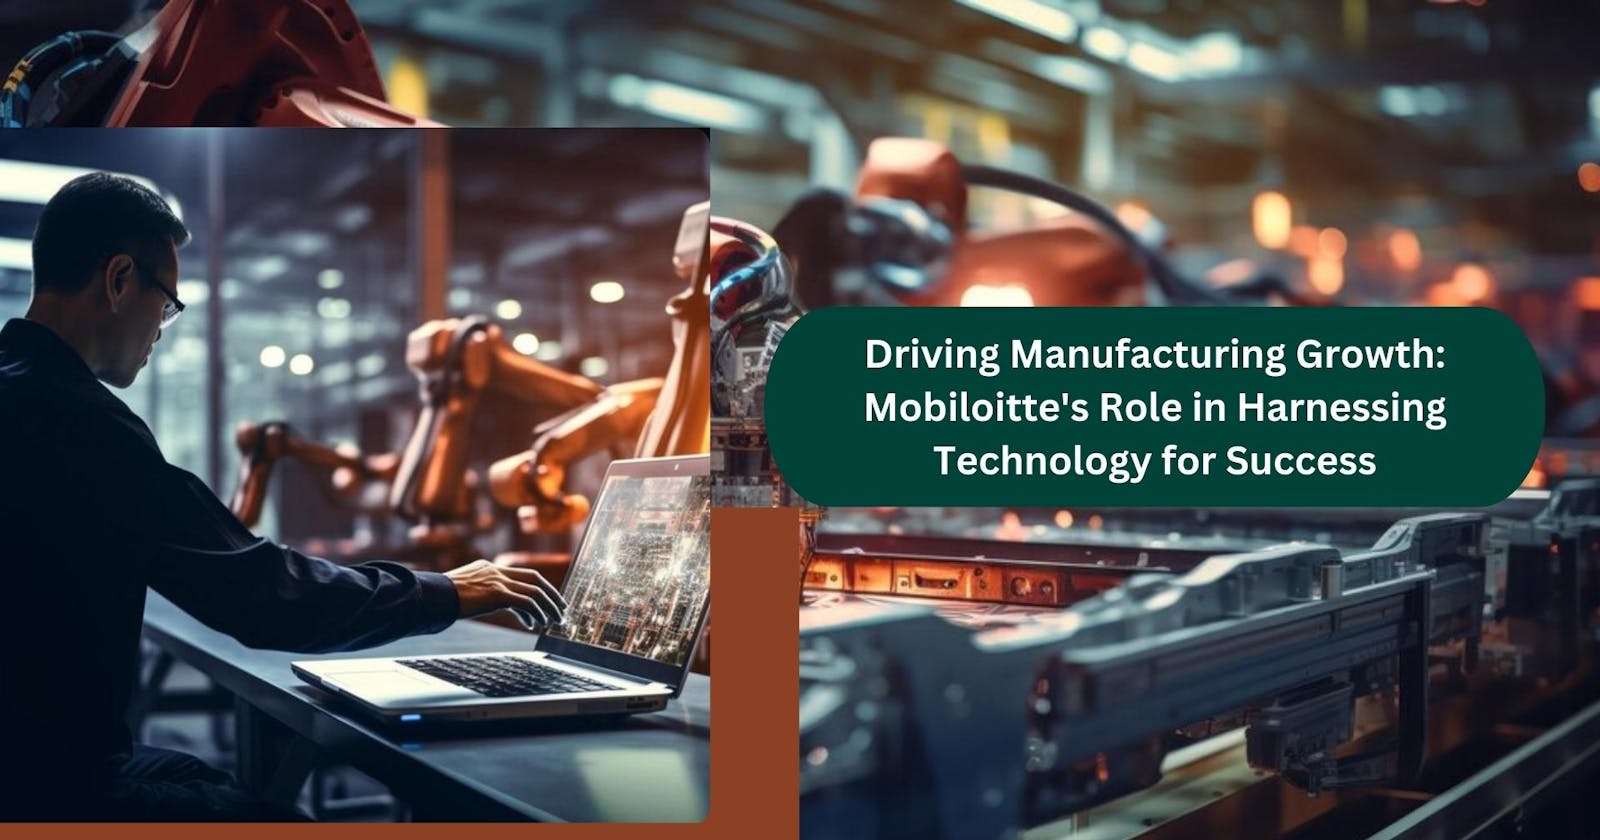 Driving Manufacturing Growth: Mobiloitte's Role in Harnessing Technology for Success